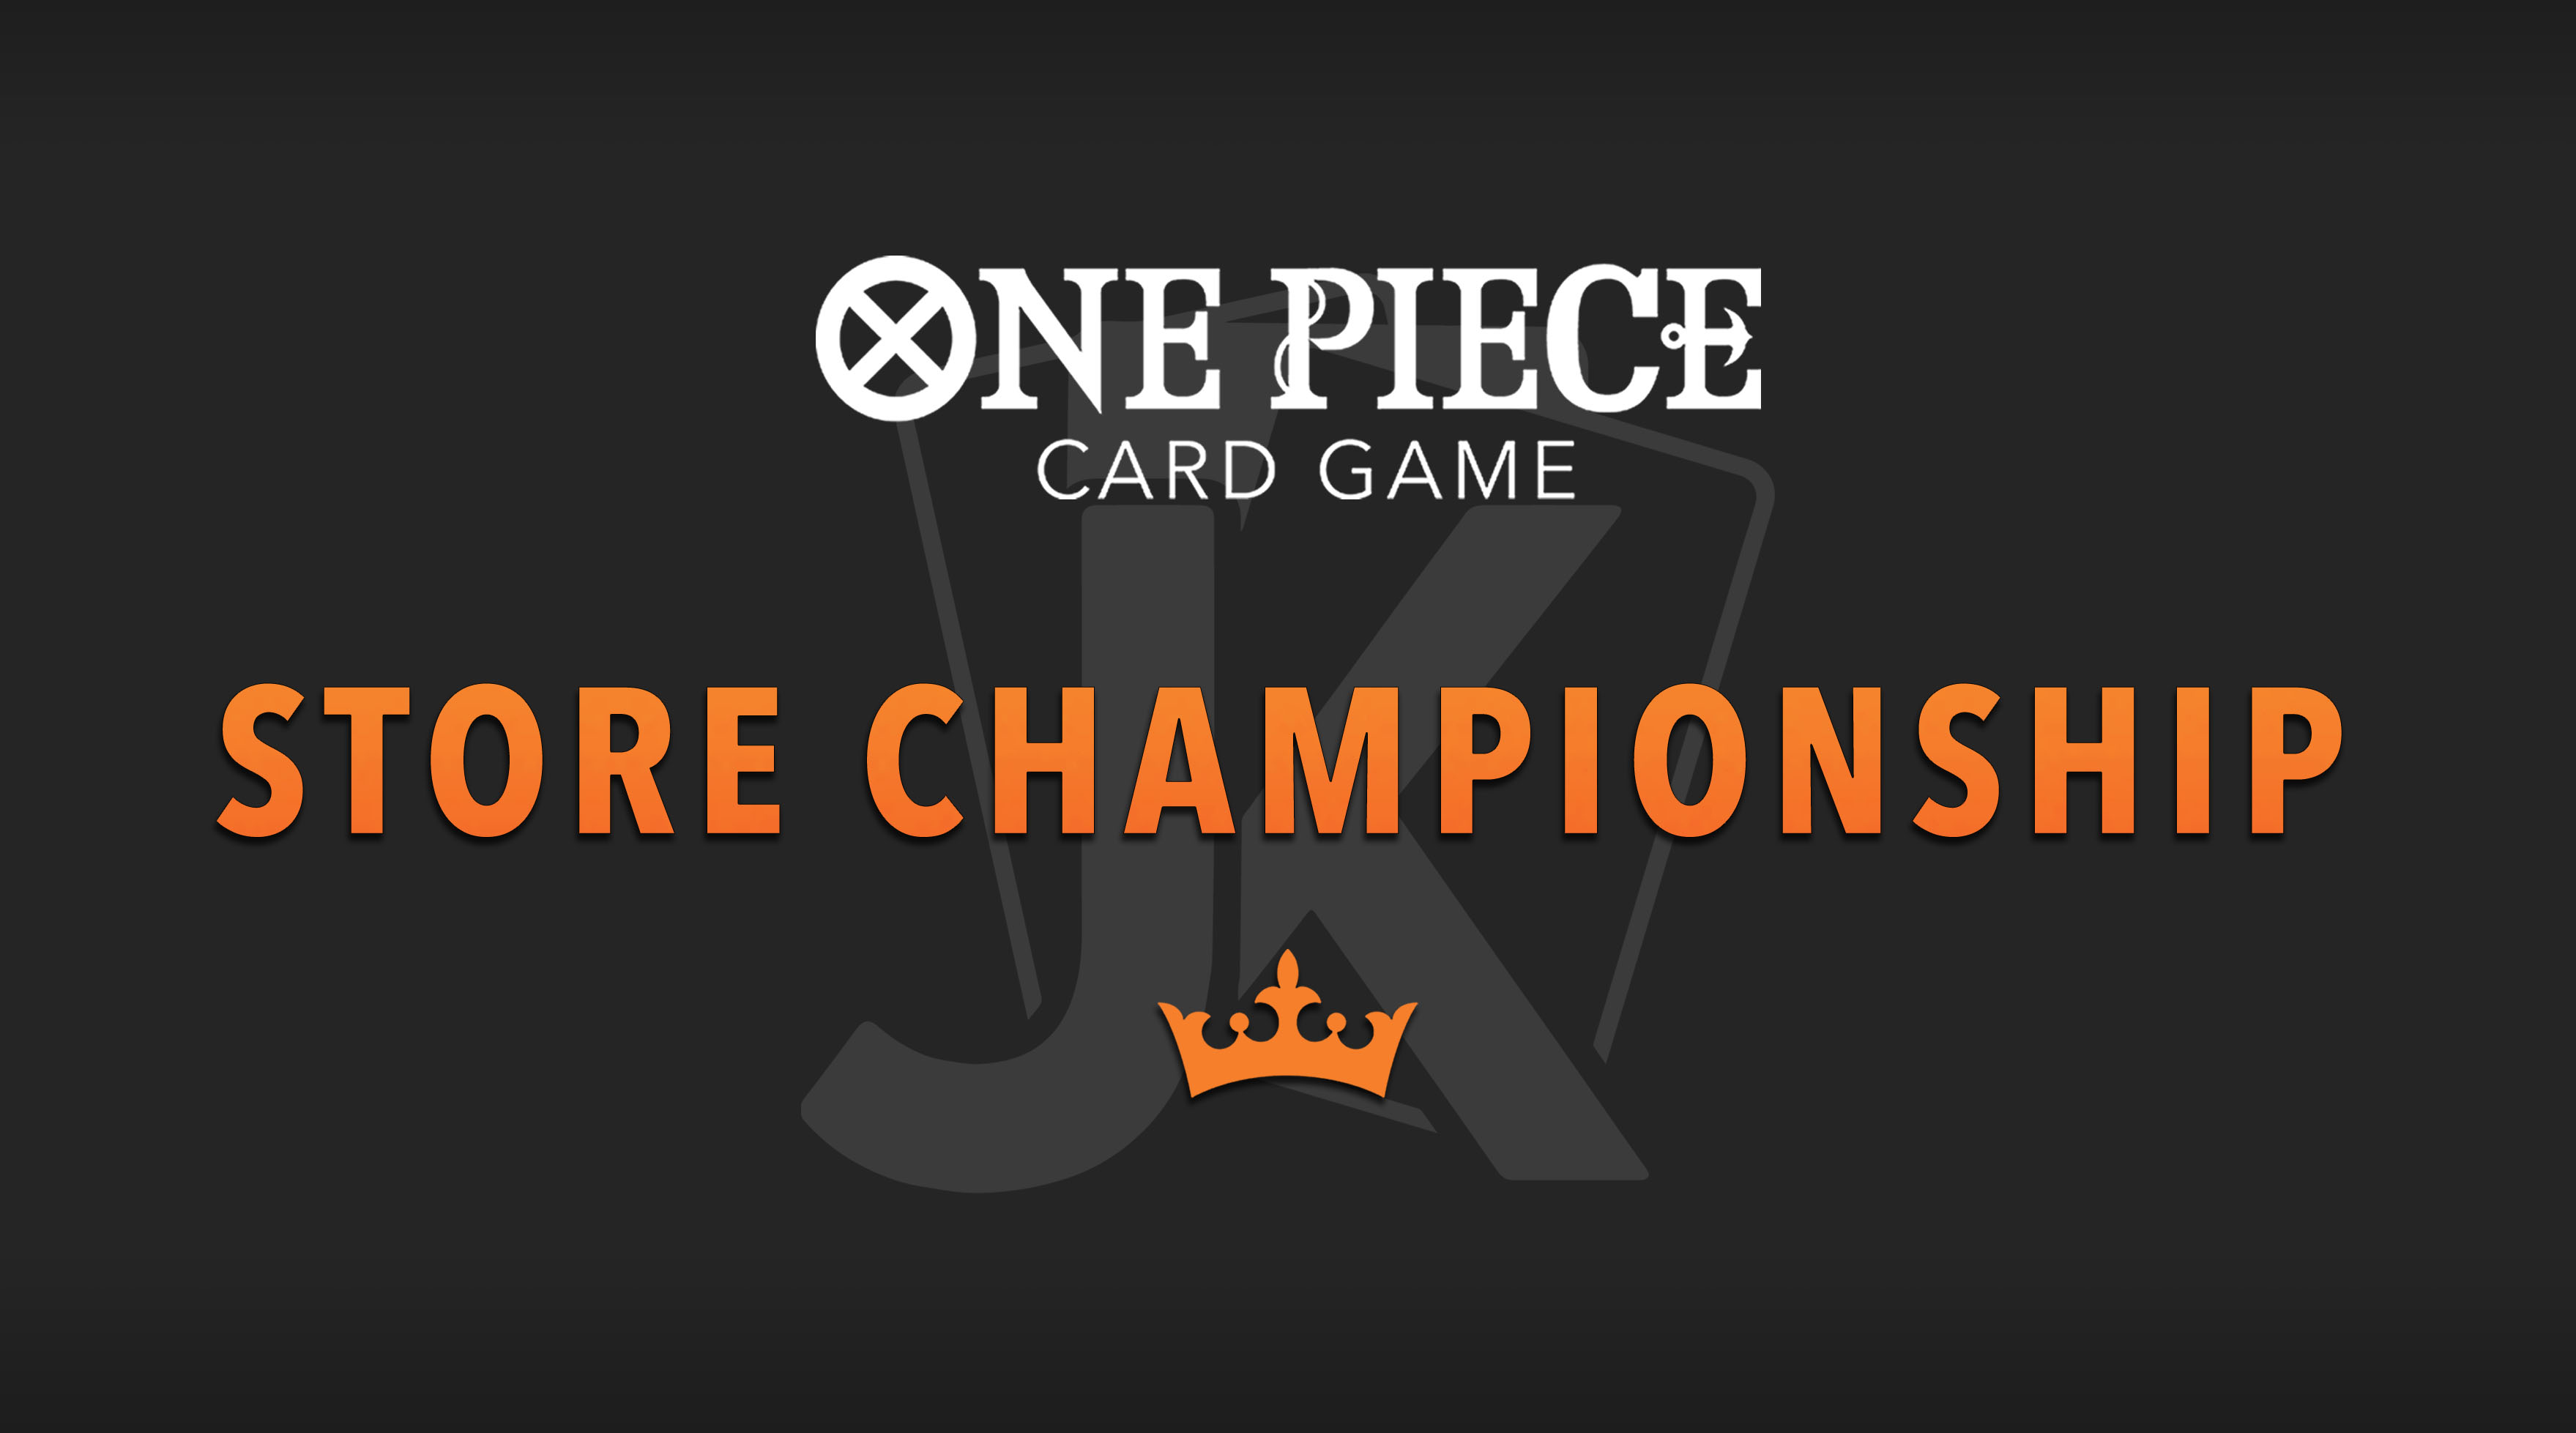 One Piece: Store Championship